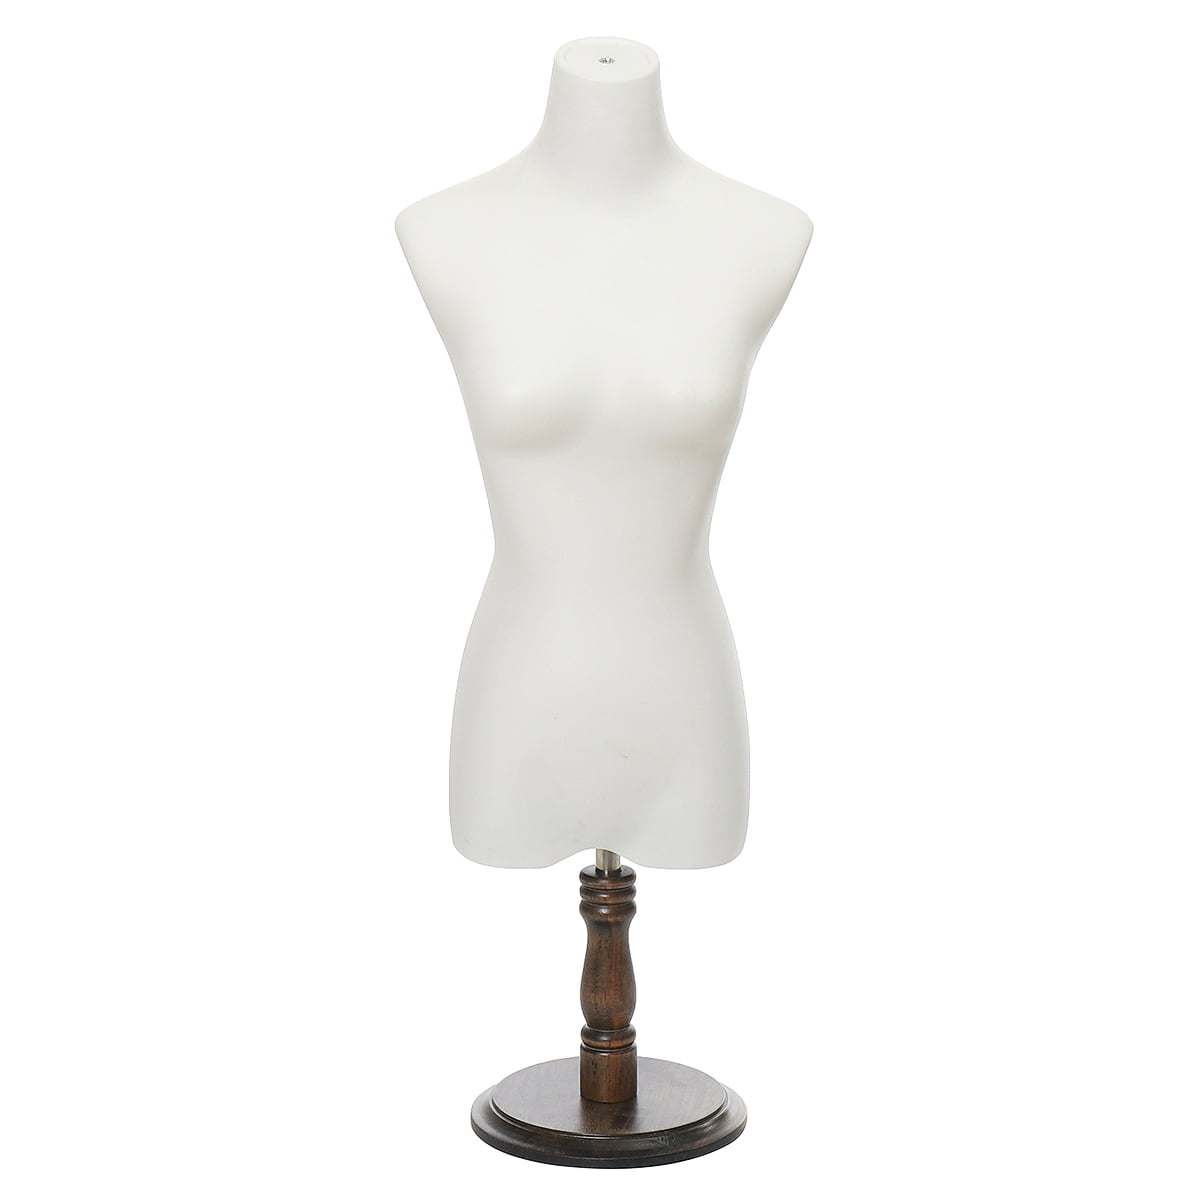 Female Mannequin Torso Body Dress Form with Tripod Base Stand,Non-Straight Pinnable, 60”-67 Adjustable Height,34” 26” 35”,for Clothing Jewelry Display 